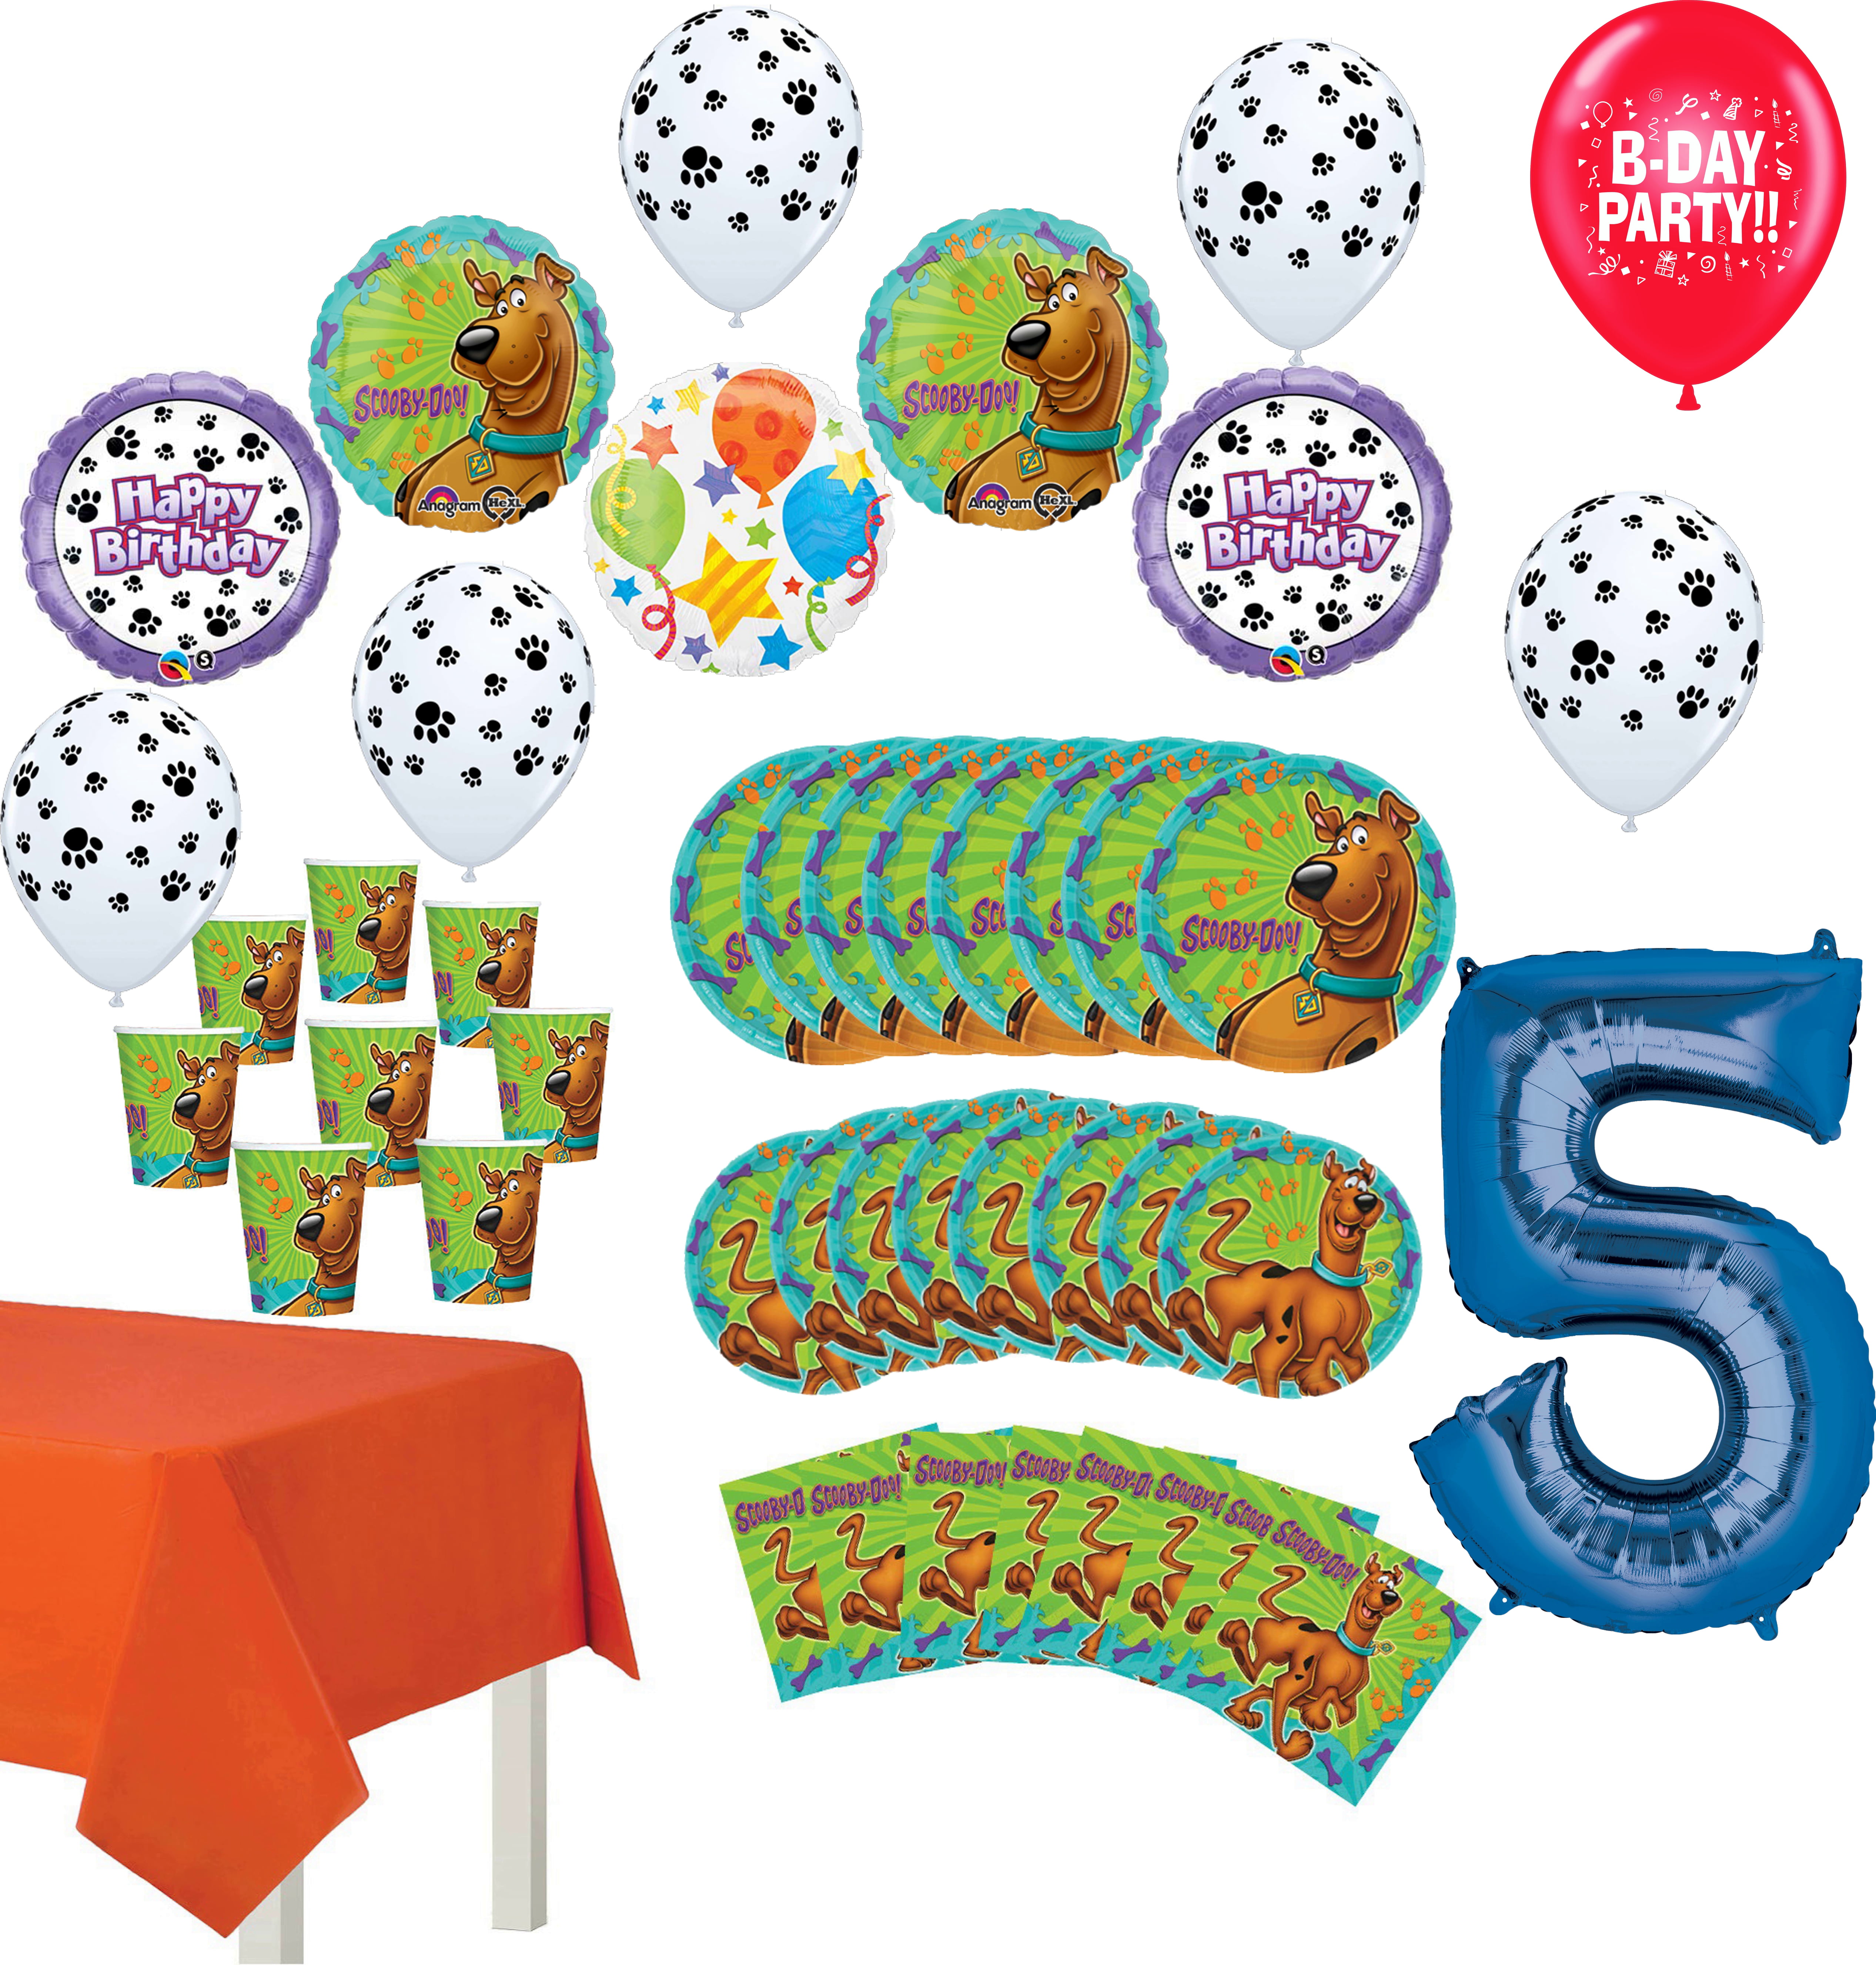 No Helium Needed TABLE DECORATION 5TH BIRTHDAY  3 PACK  FOIL BALLOON DISPLAY